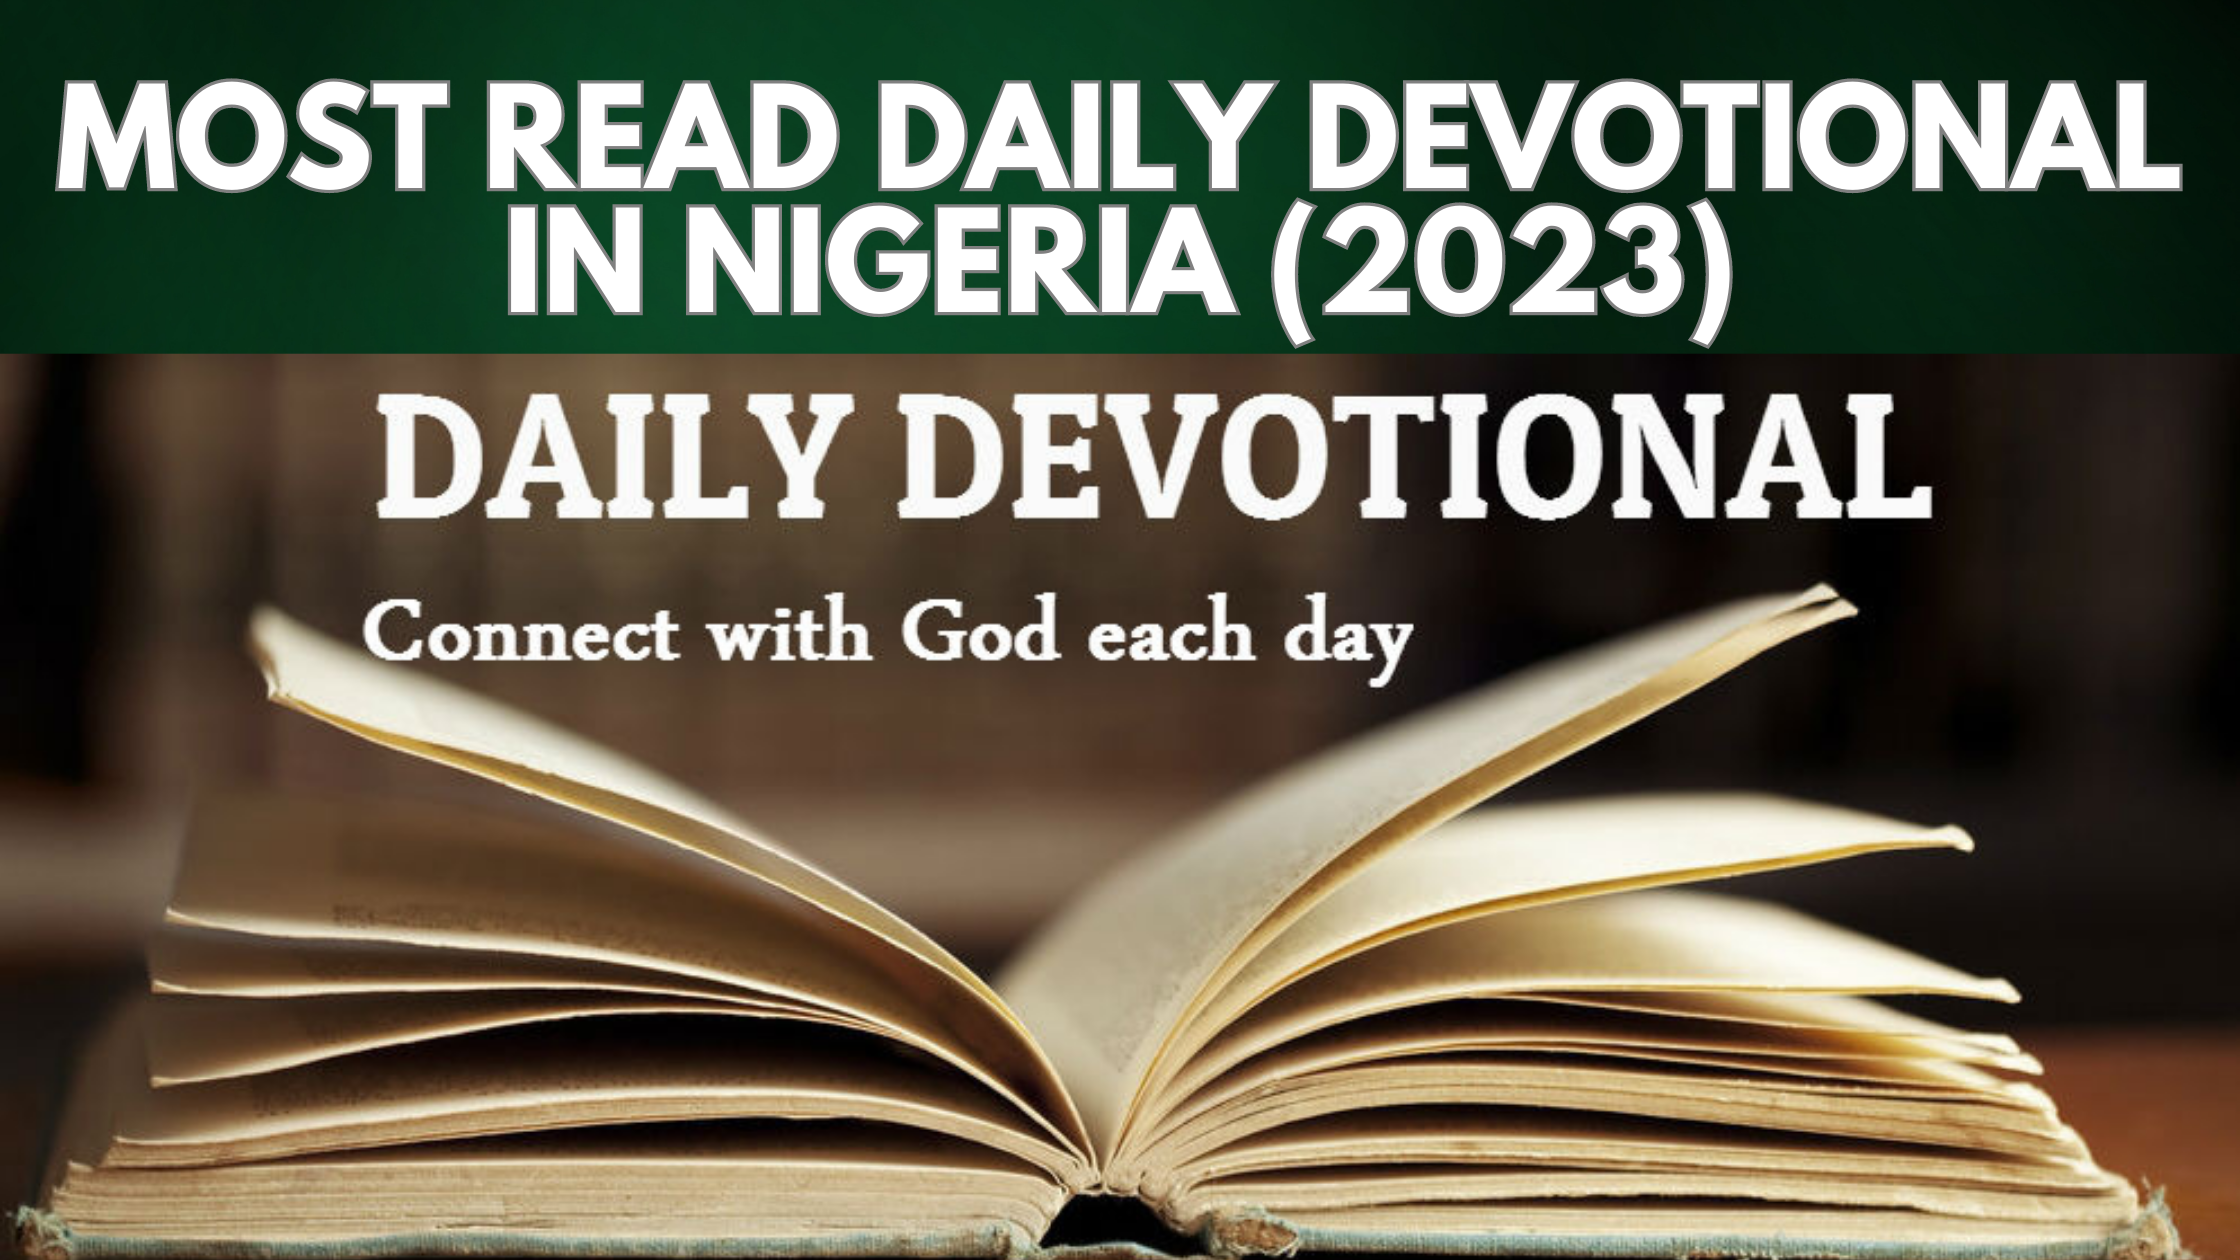 Most Read Daily Devotional in Nigeria (2023)